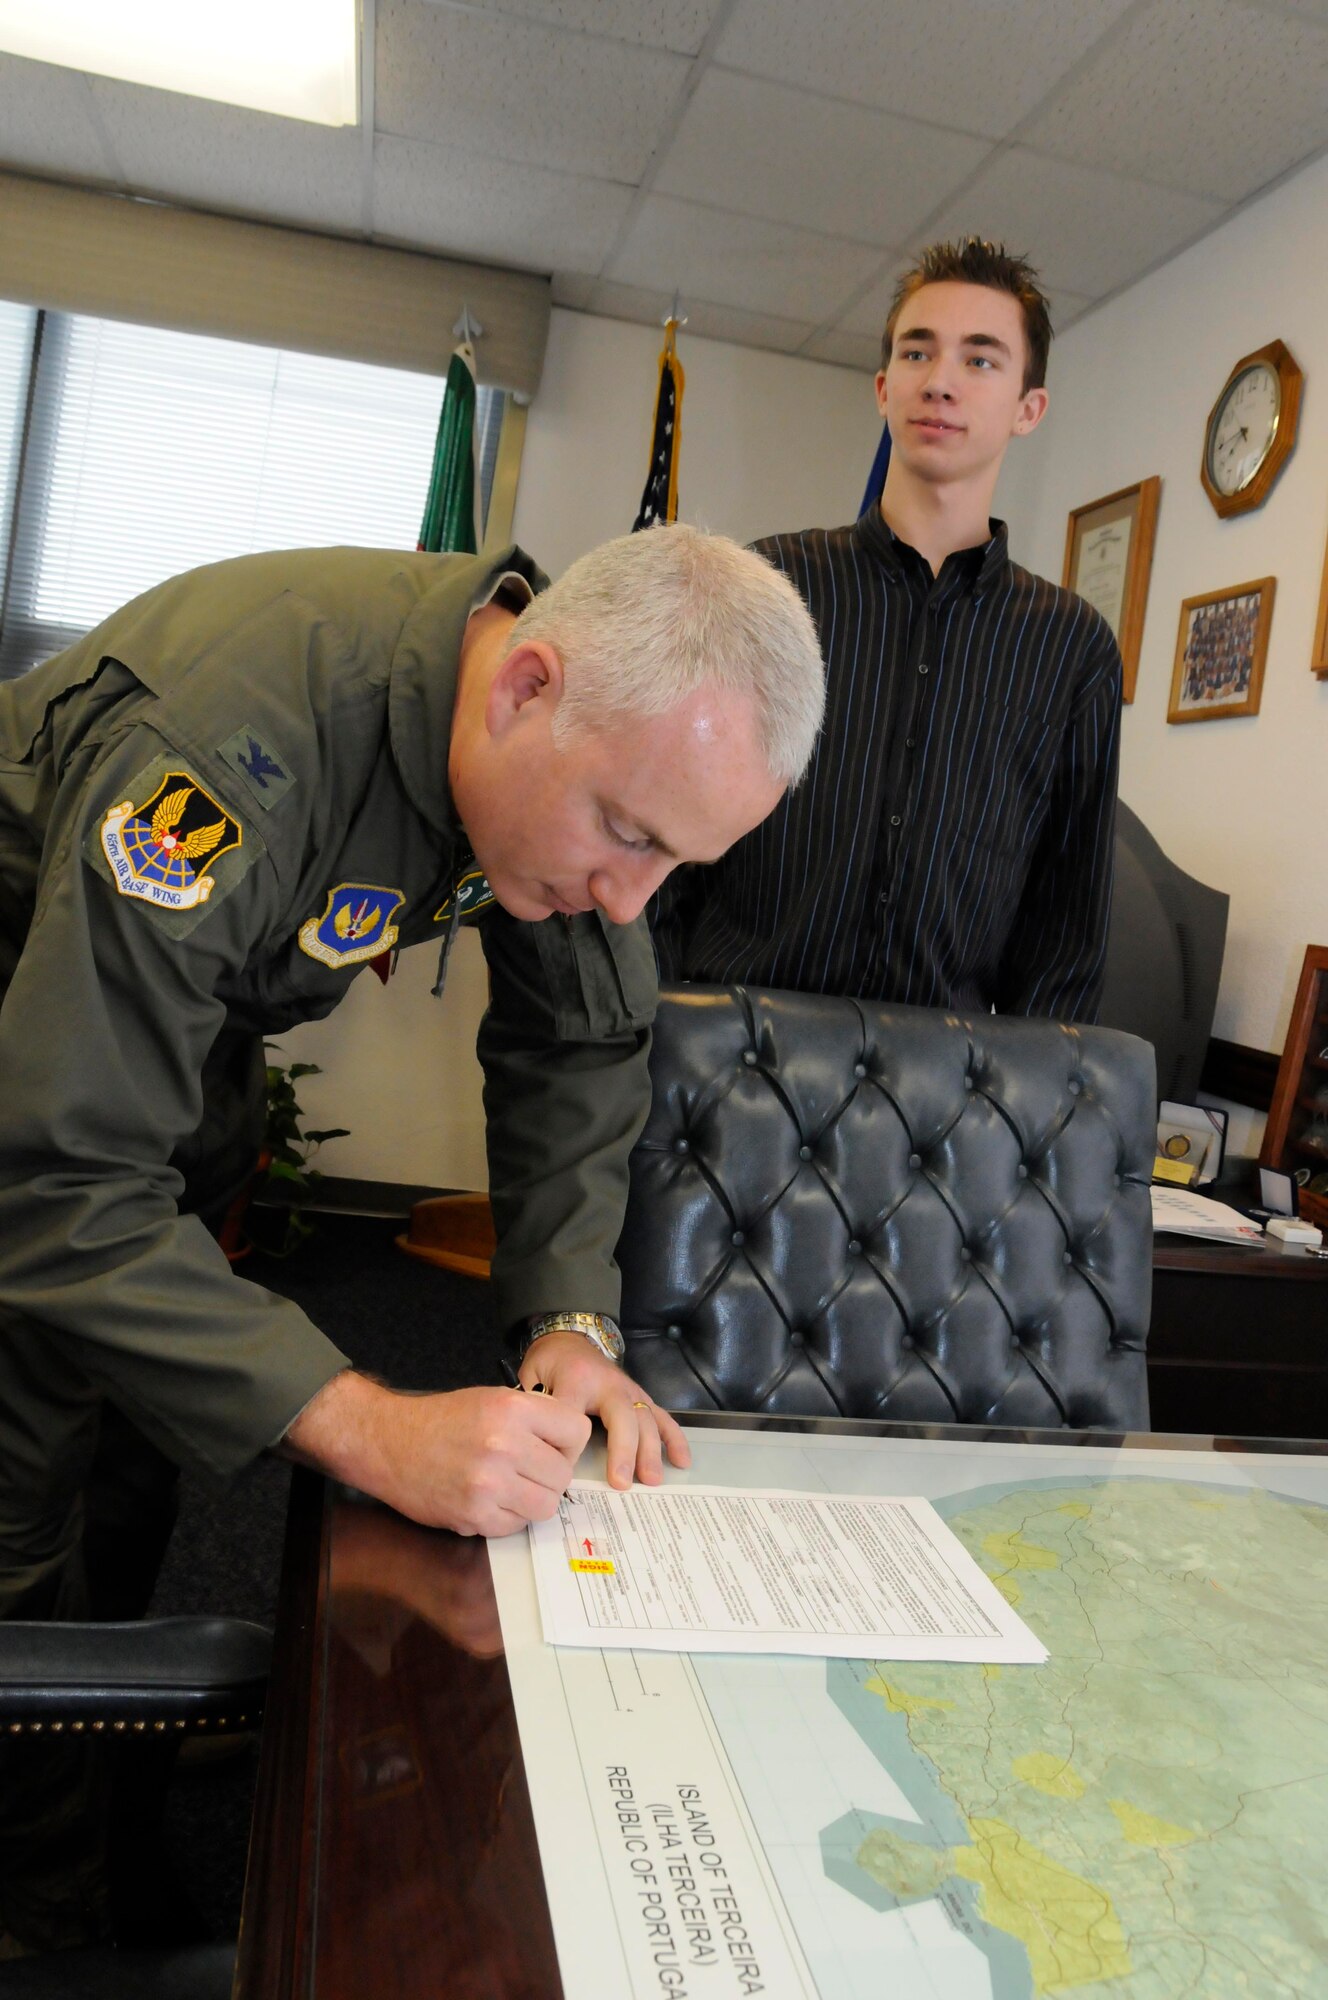 Col. Roderick Dorsey, 65th Mission Support Group commander, signs the paperwork after administering the oath of enlistment to Michael Longacre in a ceremony here Feb. 6.  Michael, soon-to-be Air Force member and son of Chief Kenneth Longacre, 65th MSS, took the oath of enlistment into the Delayed Enlistment Program here after deciding he would like to join the Air Force and follow in his father’s footsteps.  (Photo by Guido Melo)